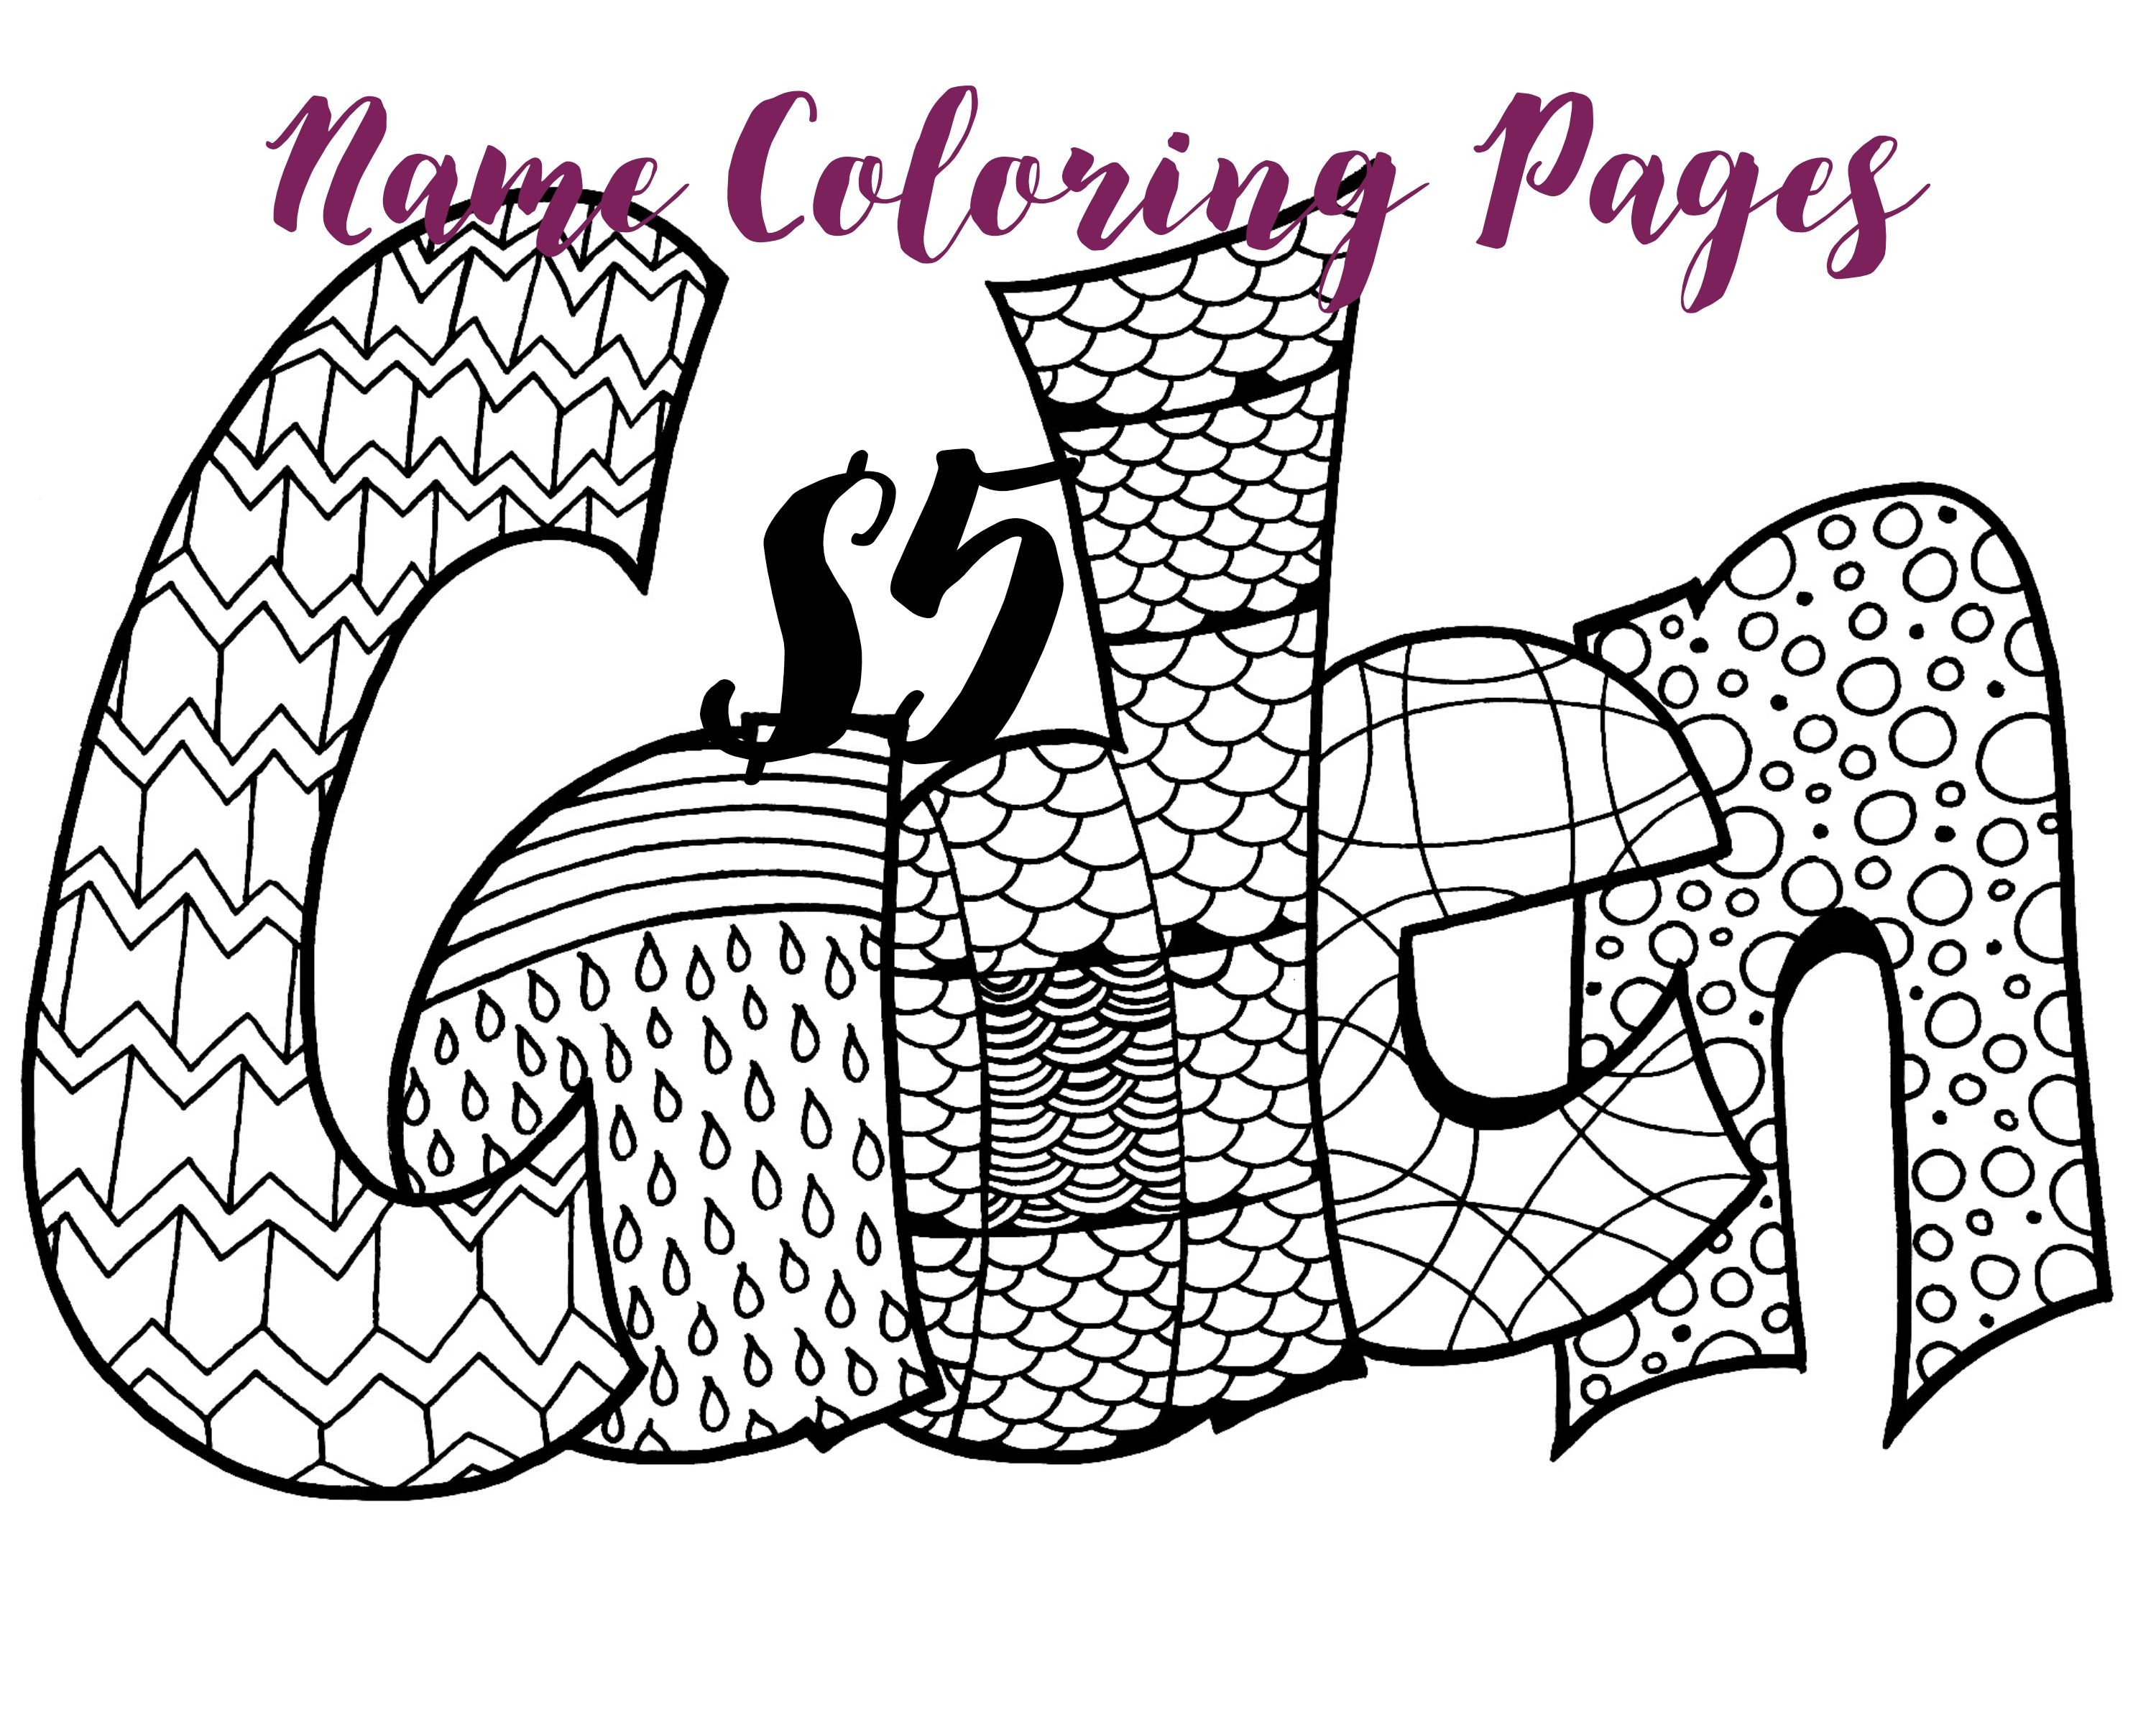 printable name coloring pages That are Impertinent | Derrick Website